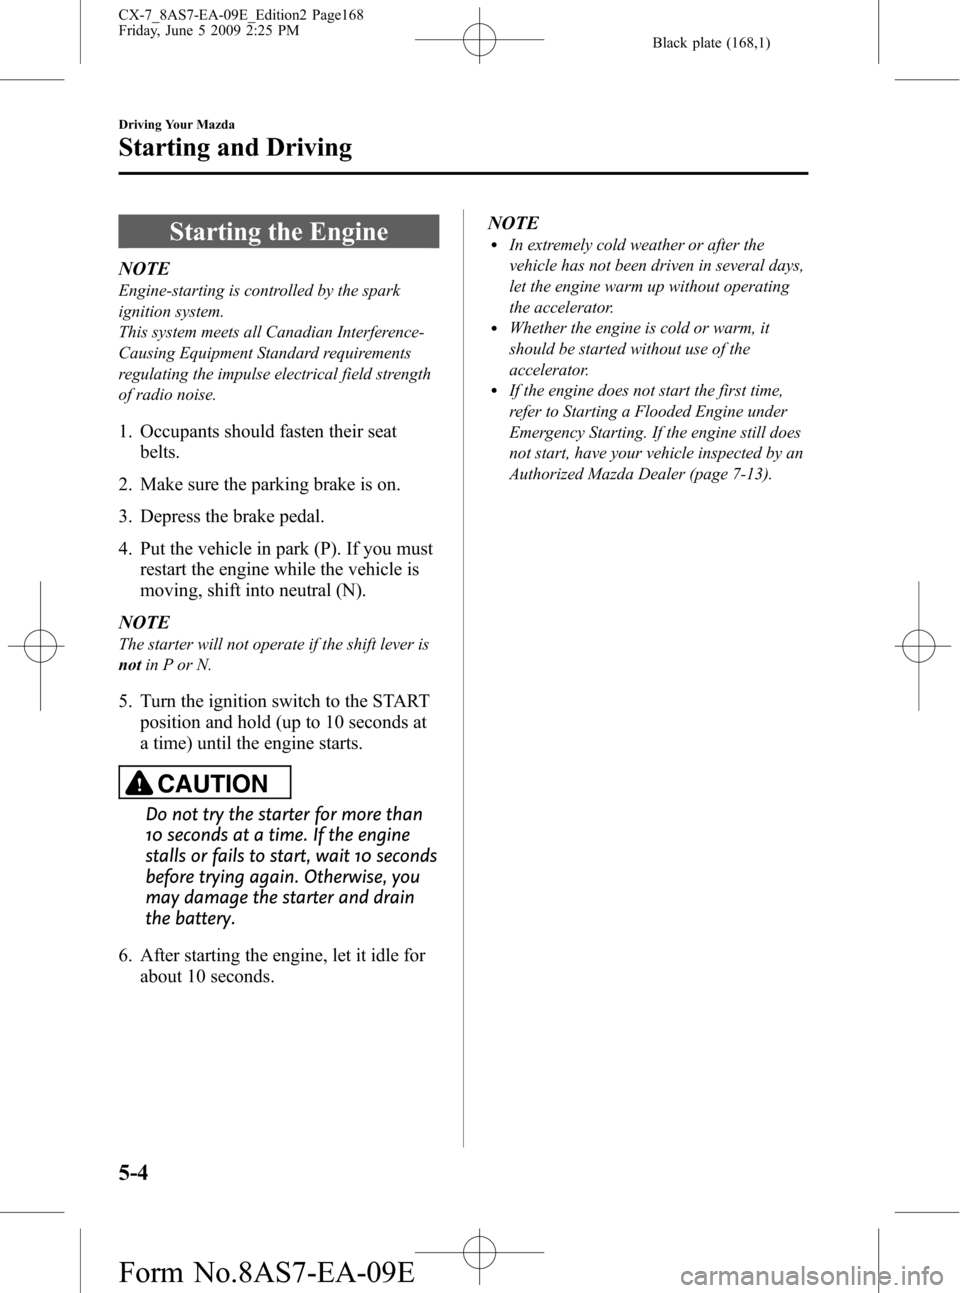 MAZDA MODEL CX-7 2010  Owners Manual (in English) Black plate (168,1)
Starting the Engine
NOTE
Engine-starting is controlled by the spark
ignition system.
This system meets all Canadian Interference-
Causing Equipment Standard requirements
regulating